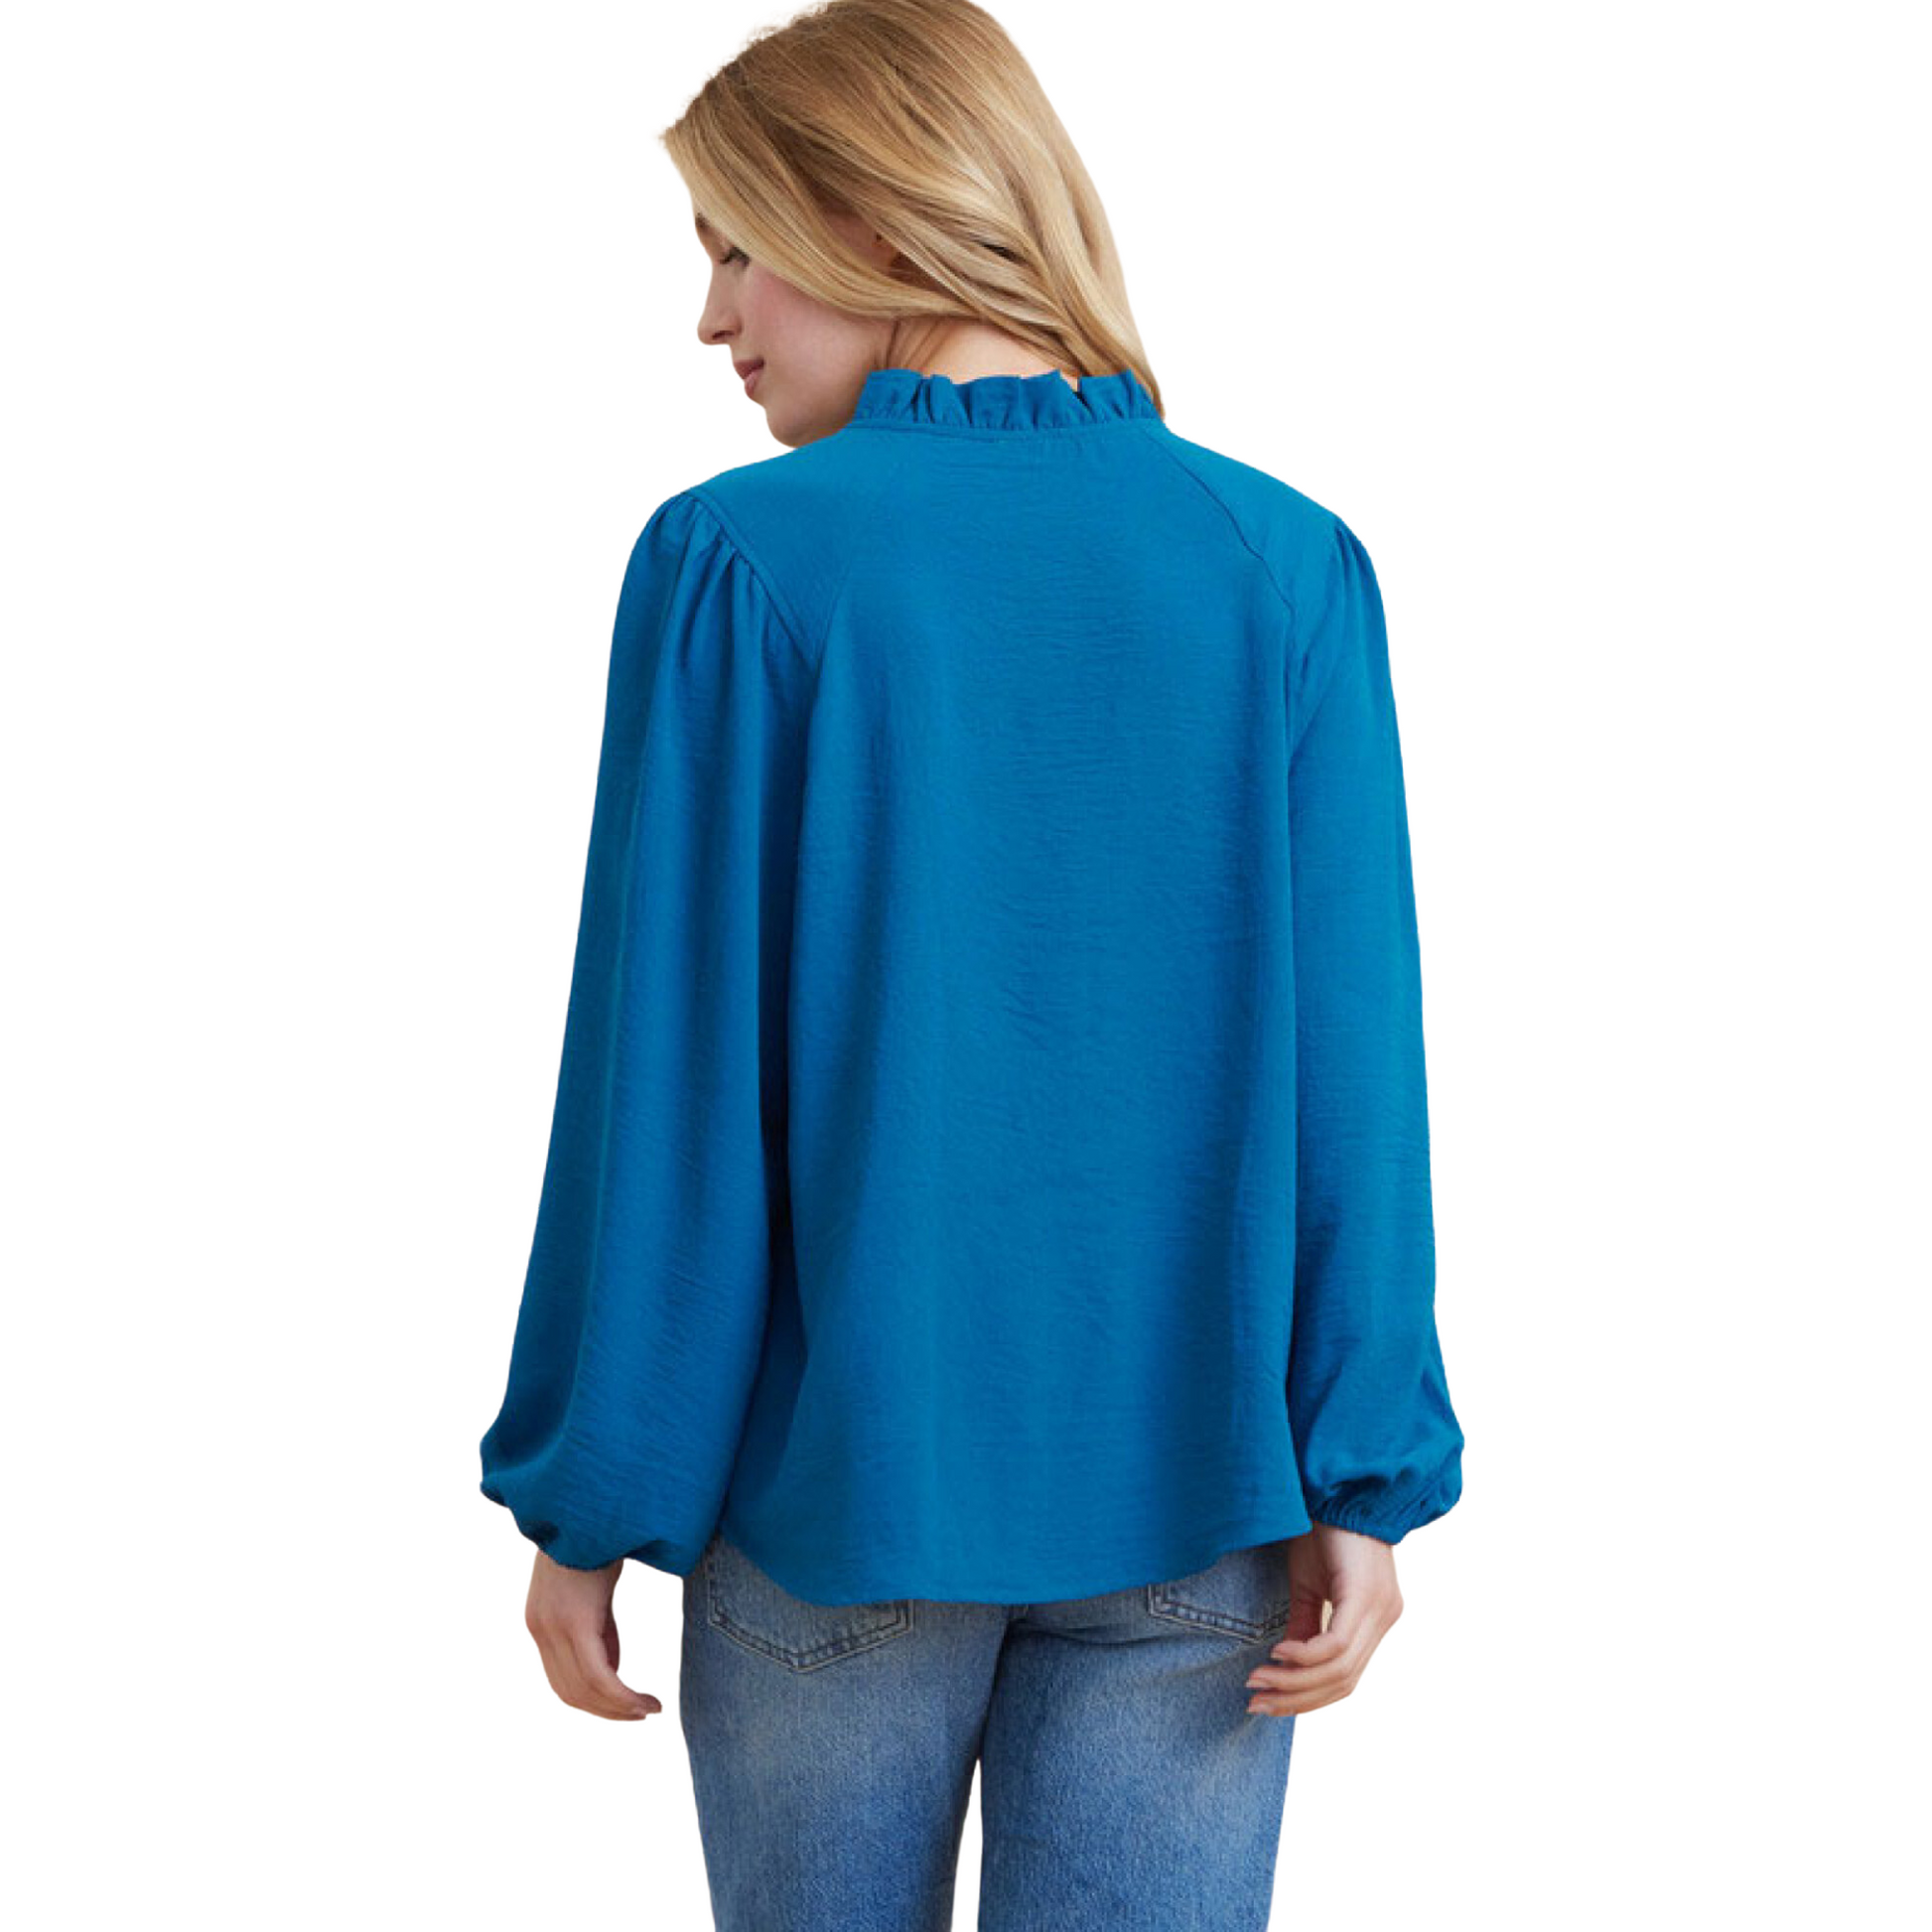 This Bubble Sleeve Top is perfect for making a statement. It features solid, lightweight material, long bubble sleeves, and a frilled self-tie neck closure. The teal color makes this top stand out from the crowd. Get ready to turn heads!